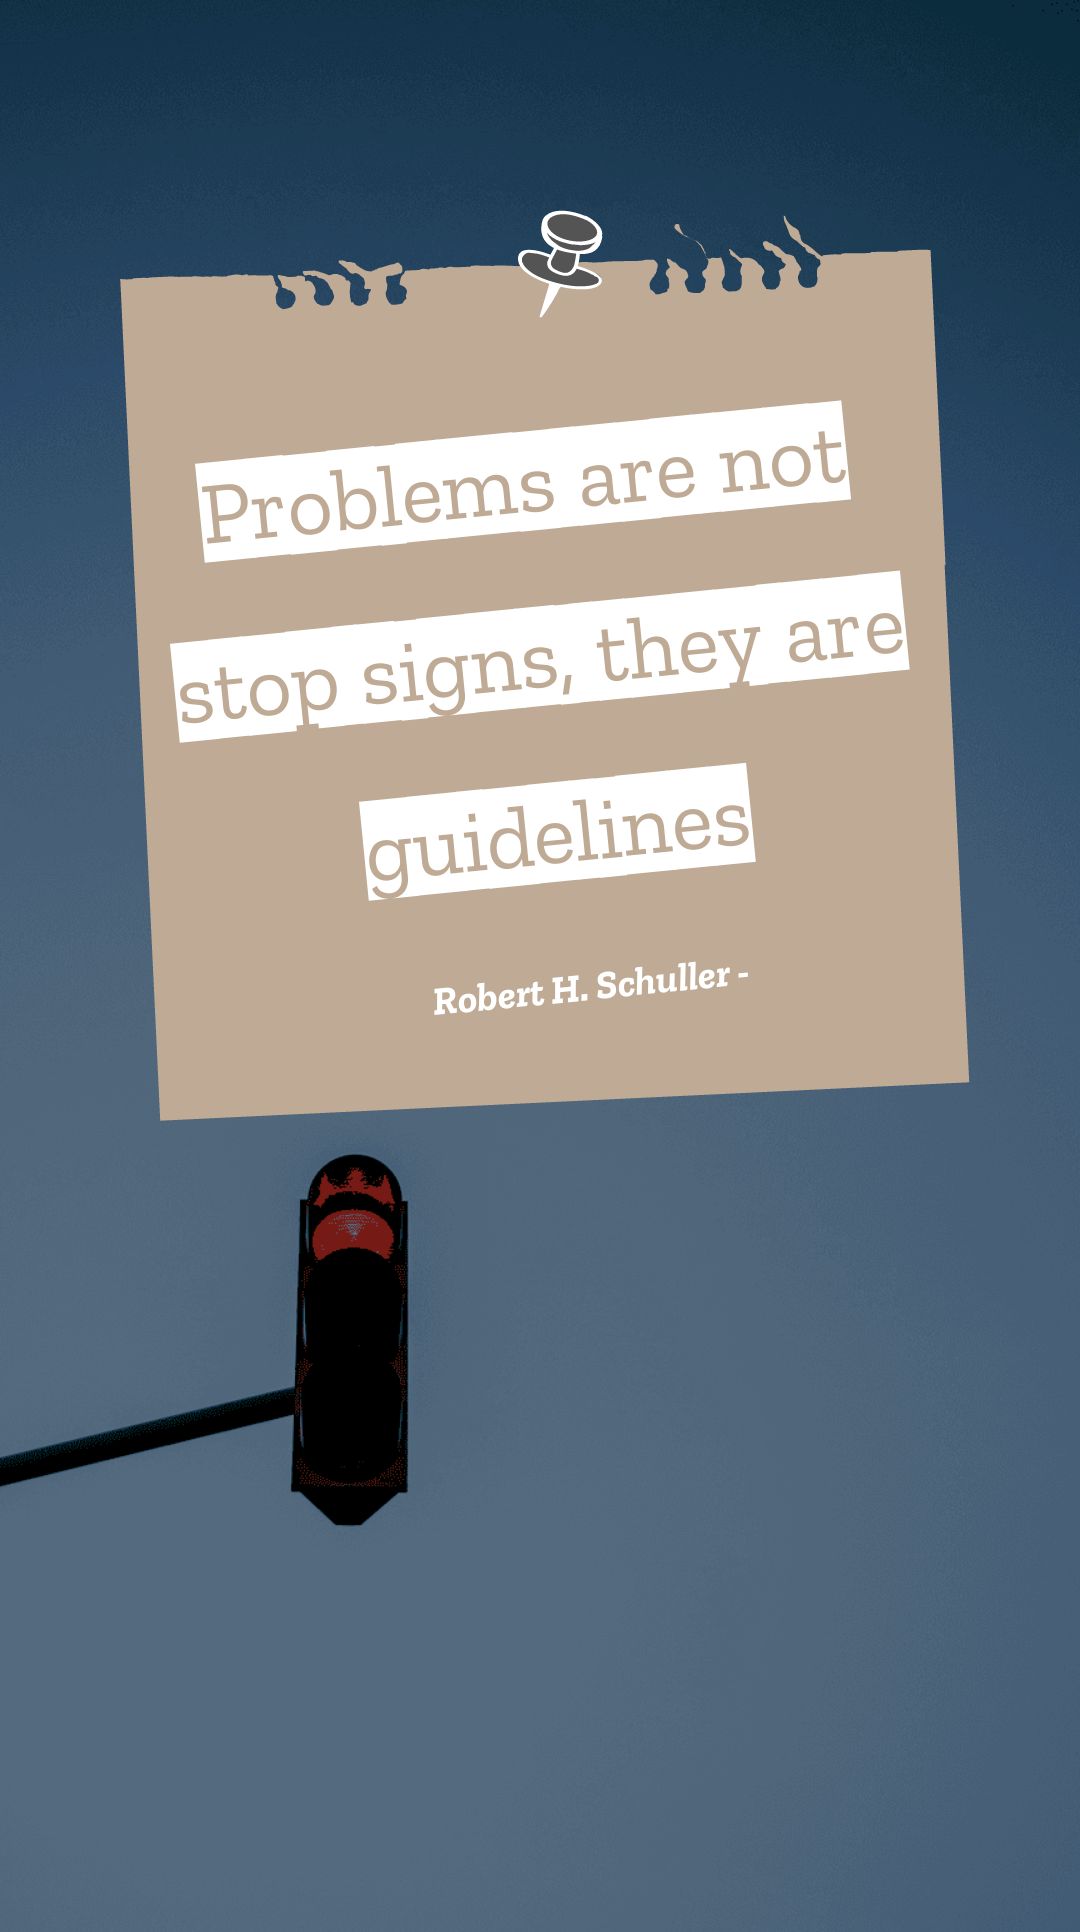 Robert H. Schuller - Problems are not stop signs, they are guidelines